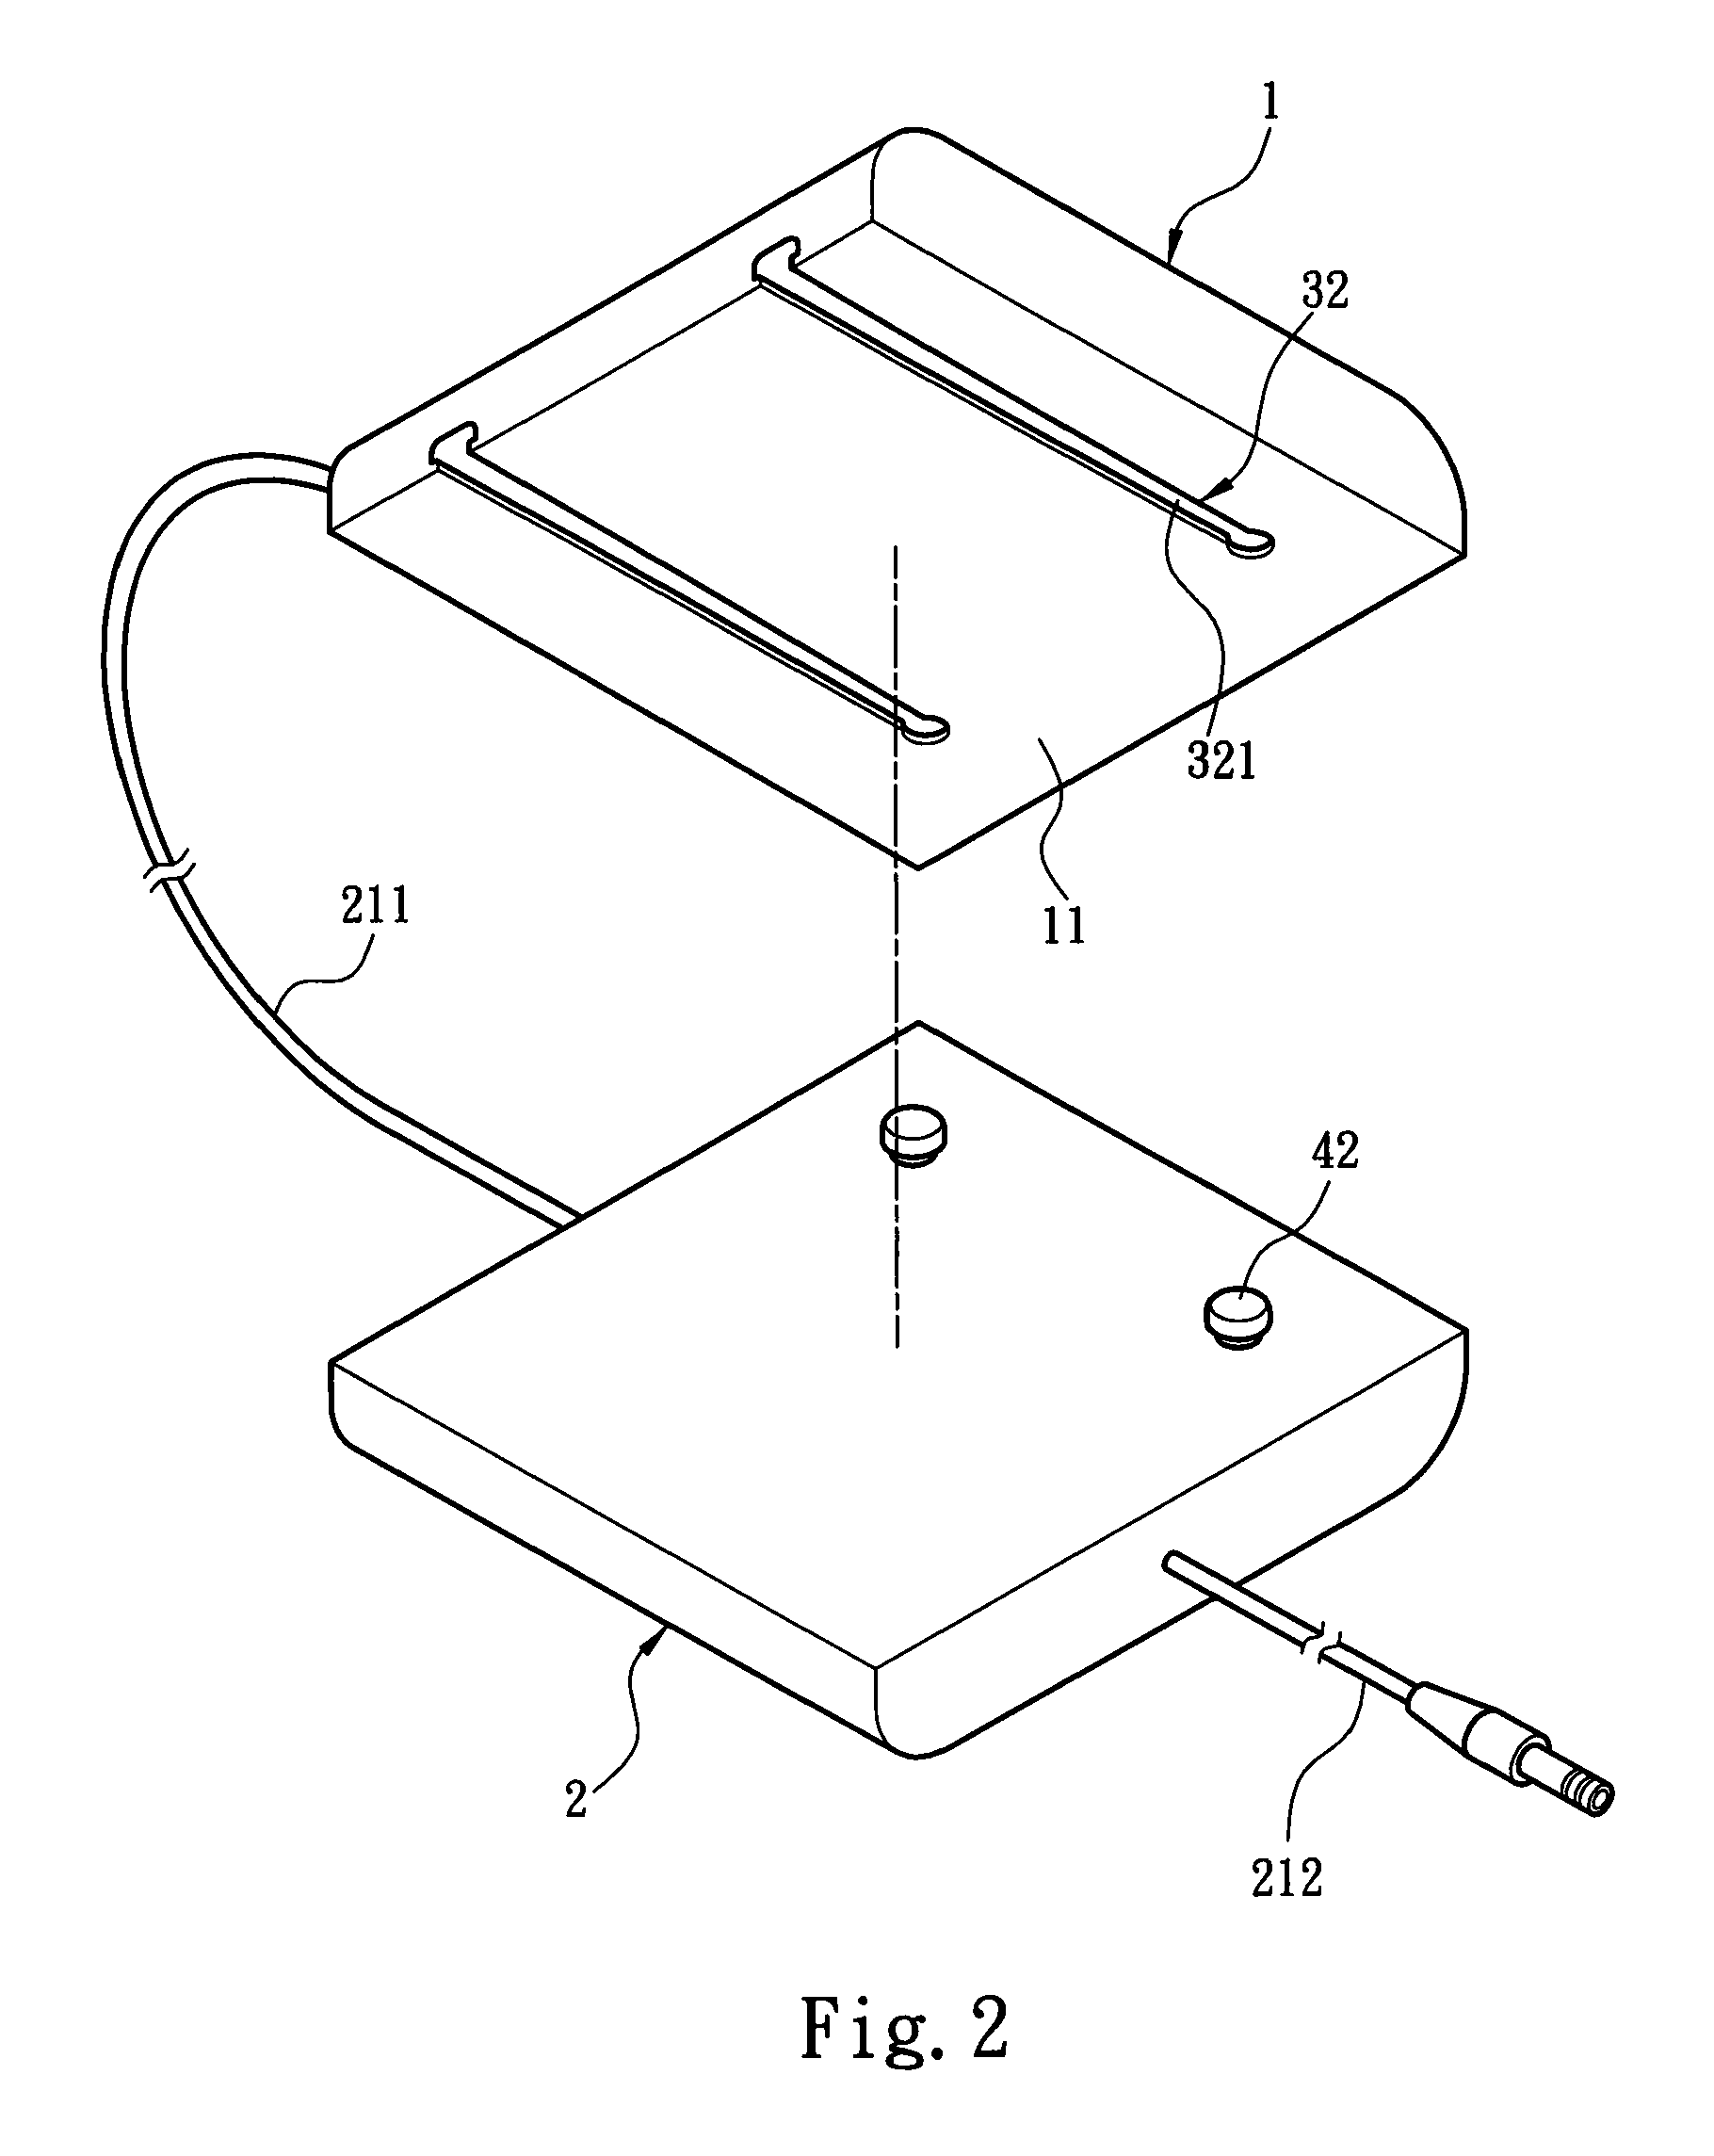 Power adapter provided line winding